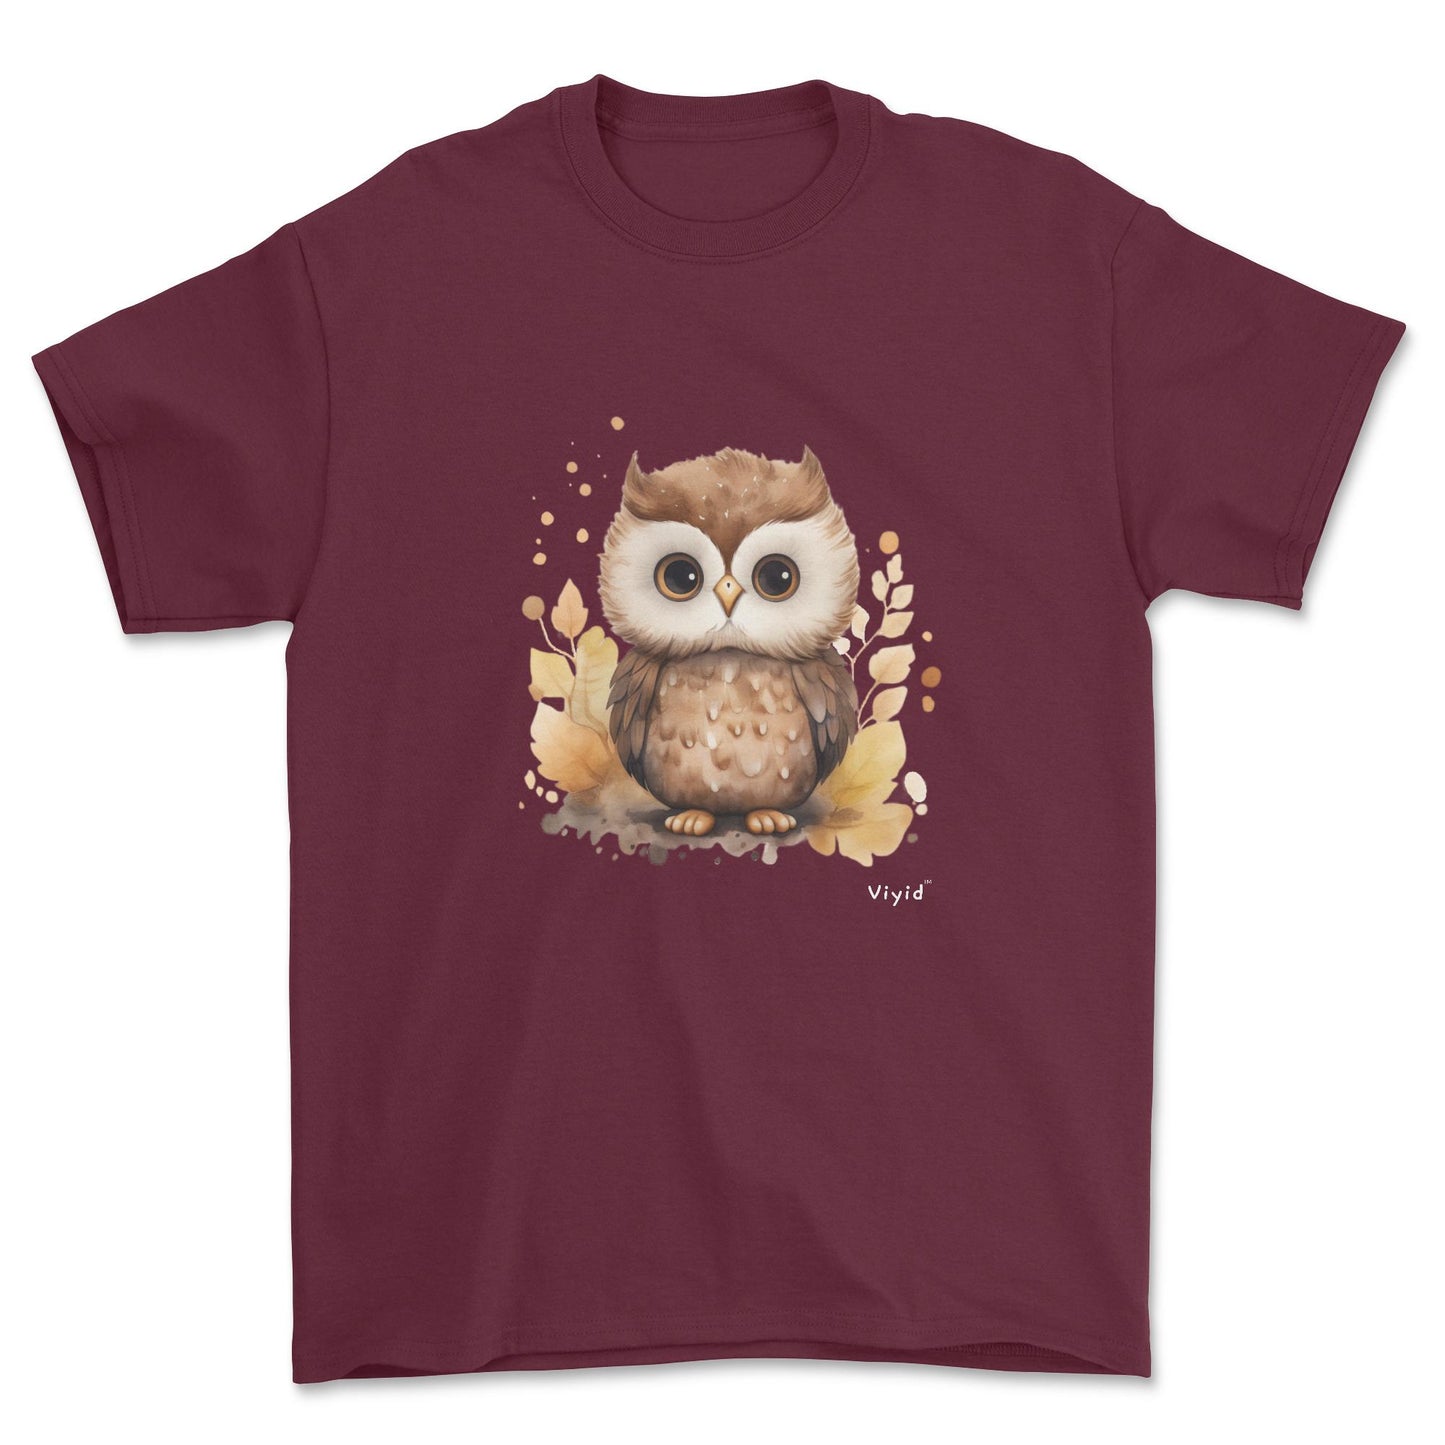 nocturnal owl adult t-shirt maroon